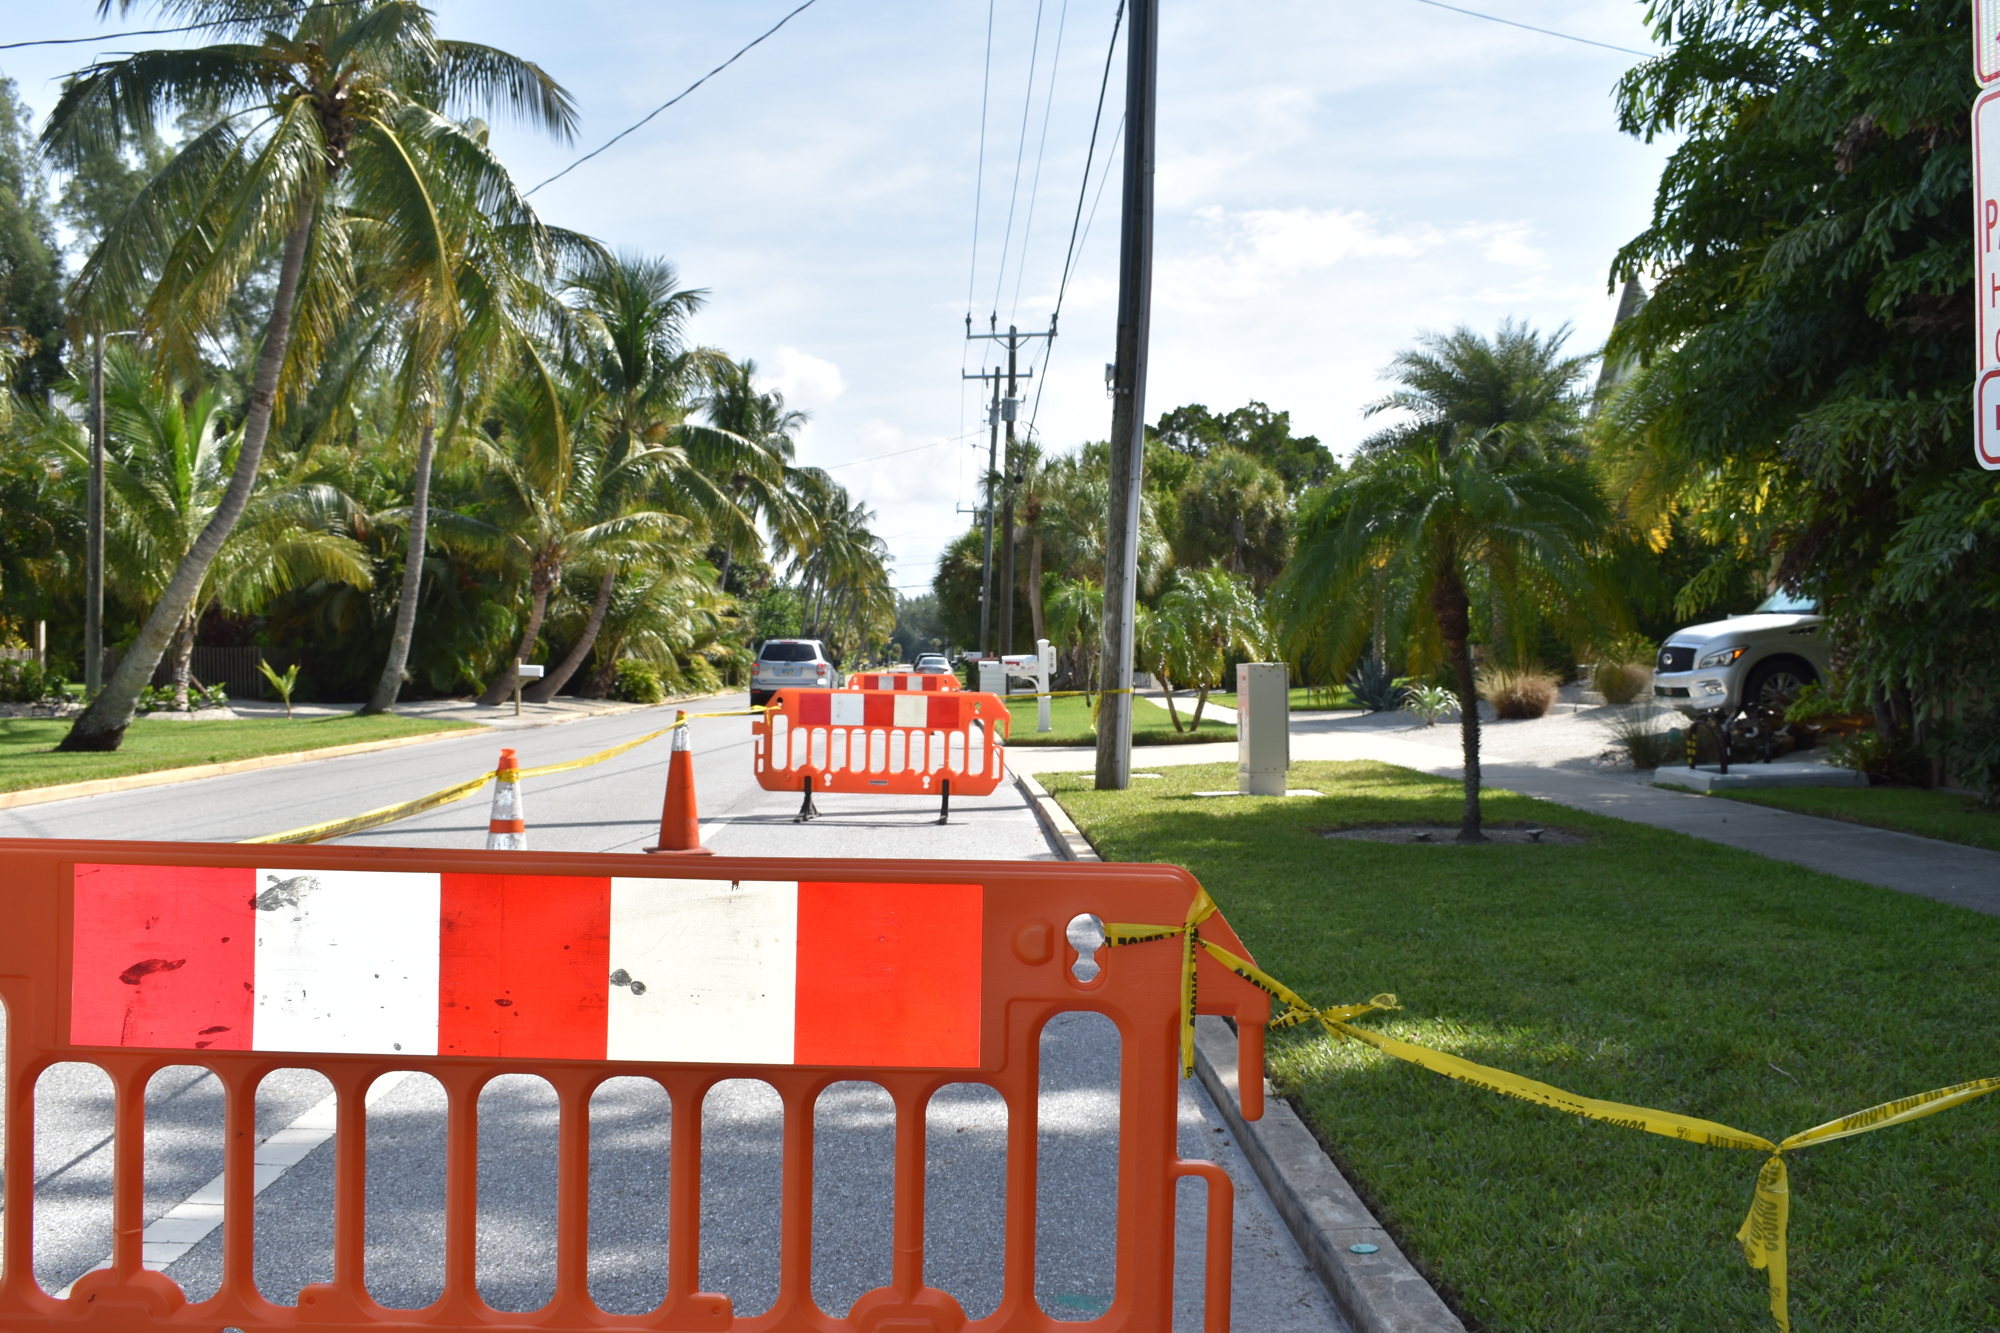 The town of Longboat Key will continue to restrict some street parking along Broadway east of Gulf of Mexico Drive in the Longbeach Village neighborhood.